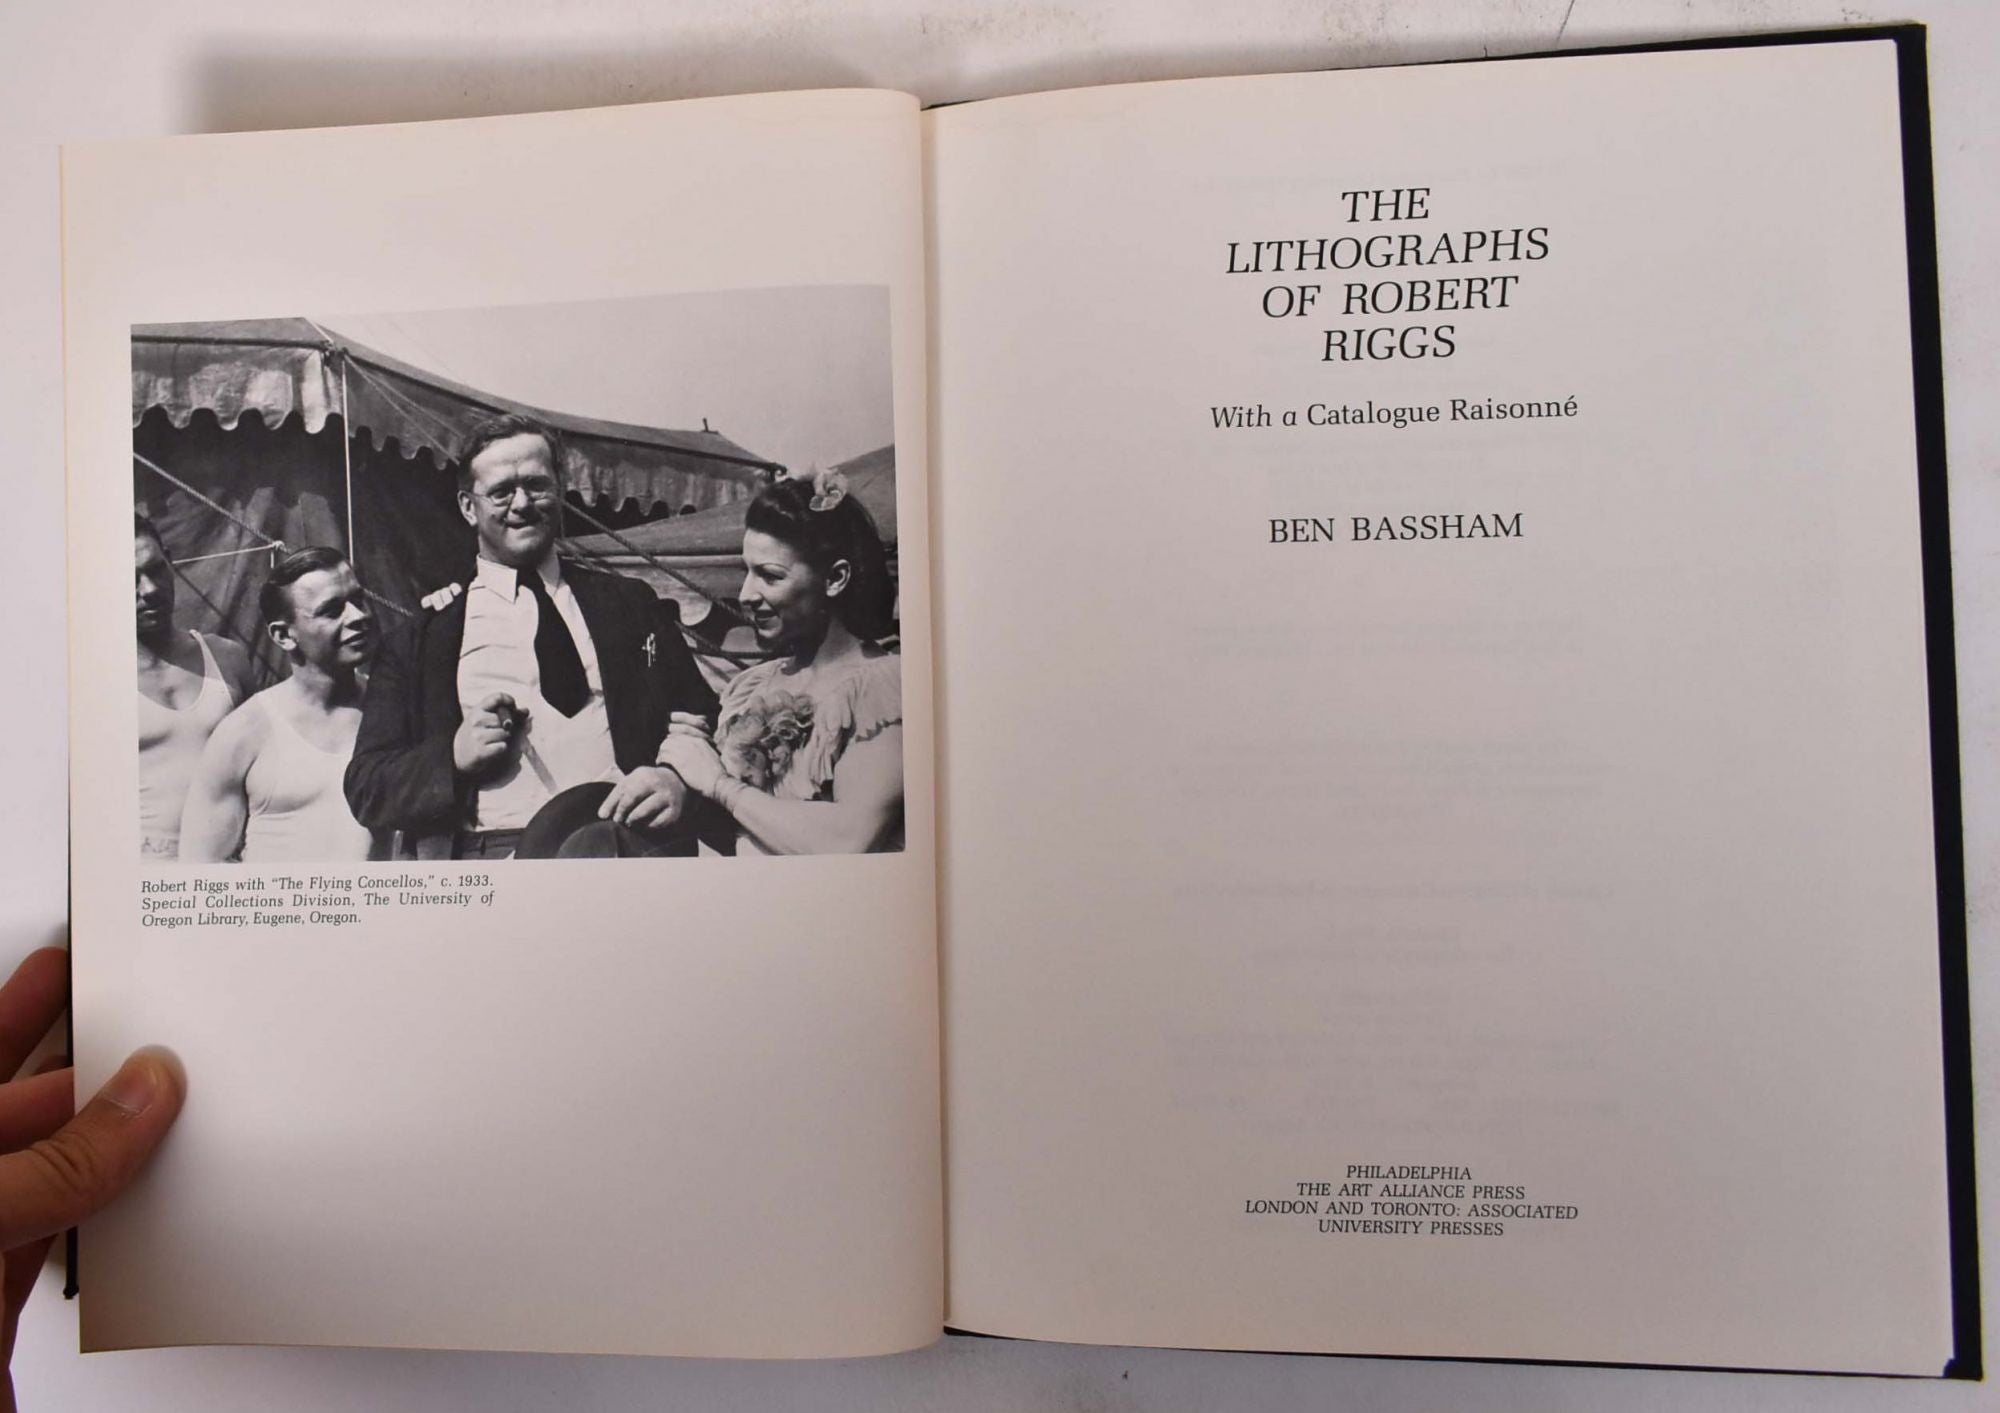 The Lithographs of Robert Riggs, with a Catalogue Raisonne by Ben Bassham  on Mullen Books